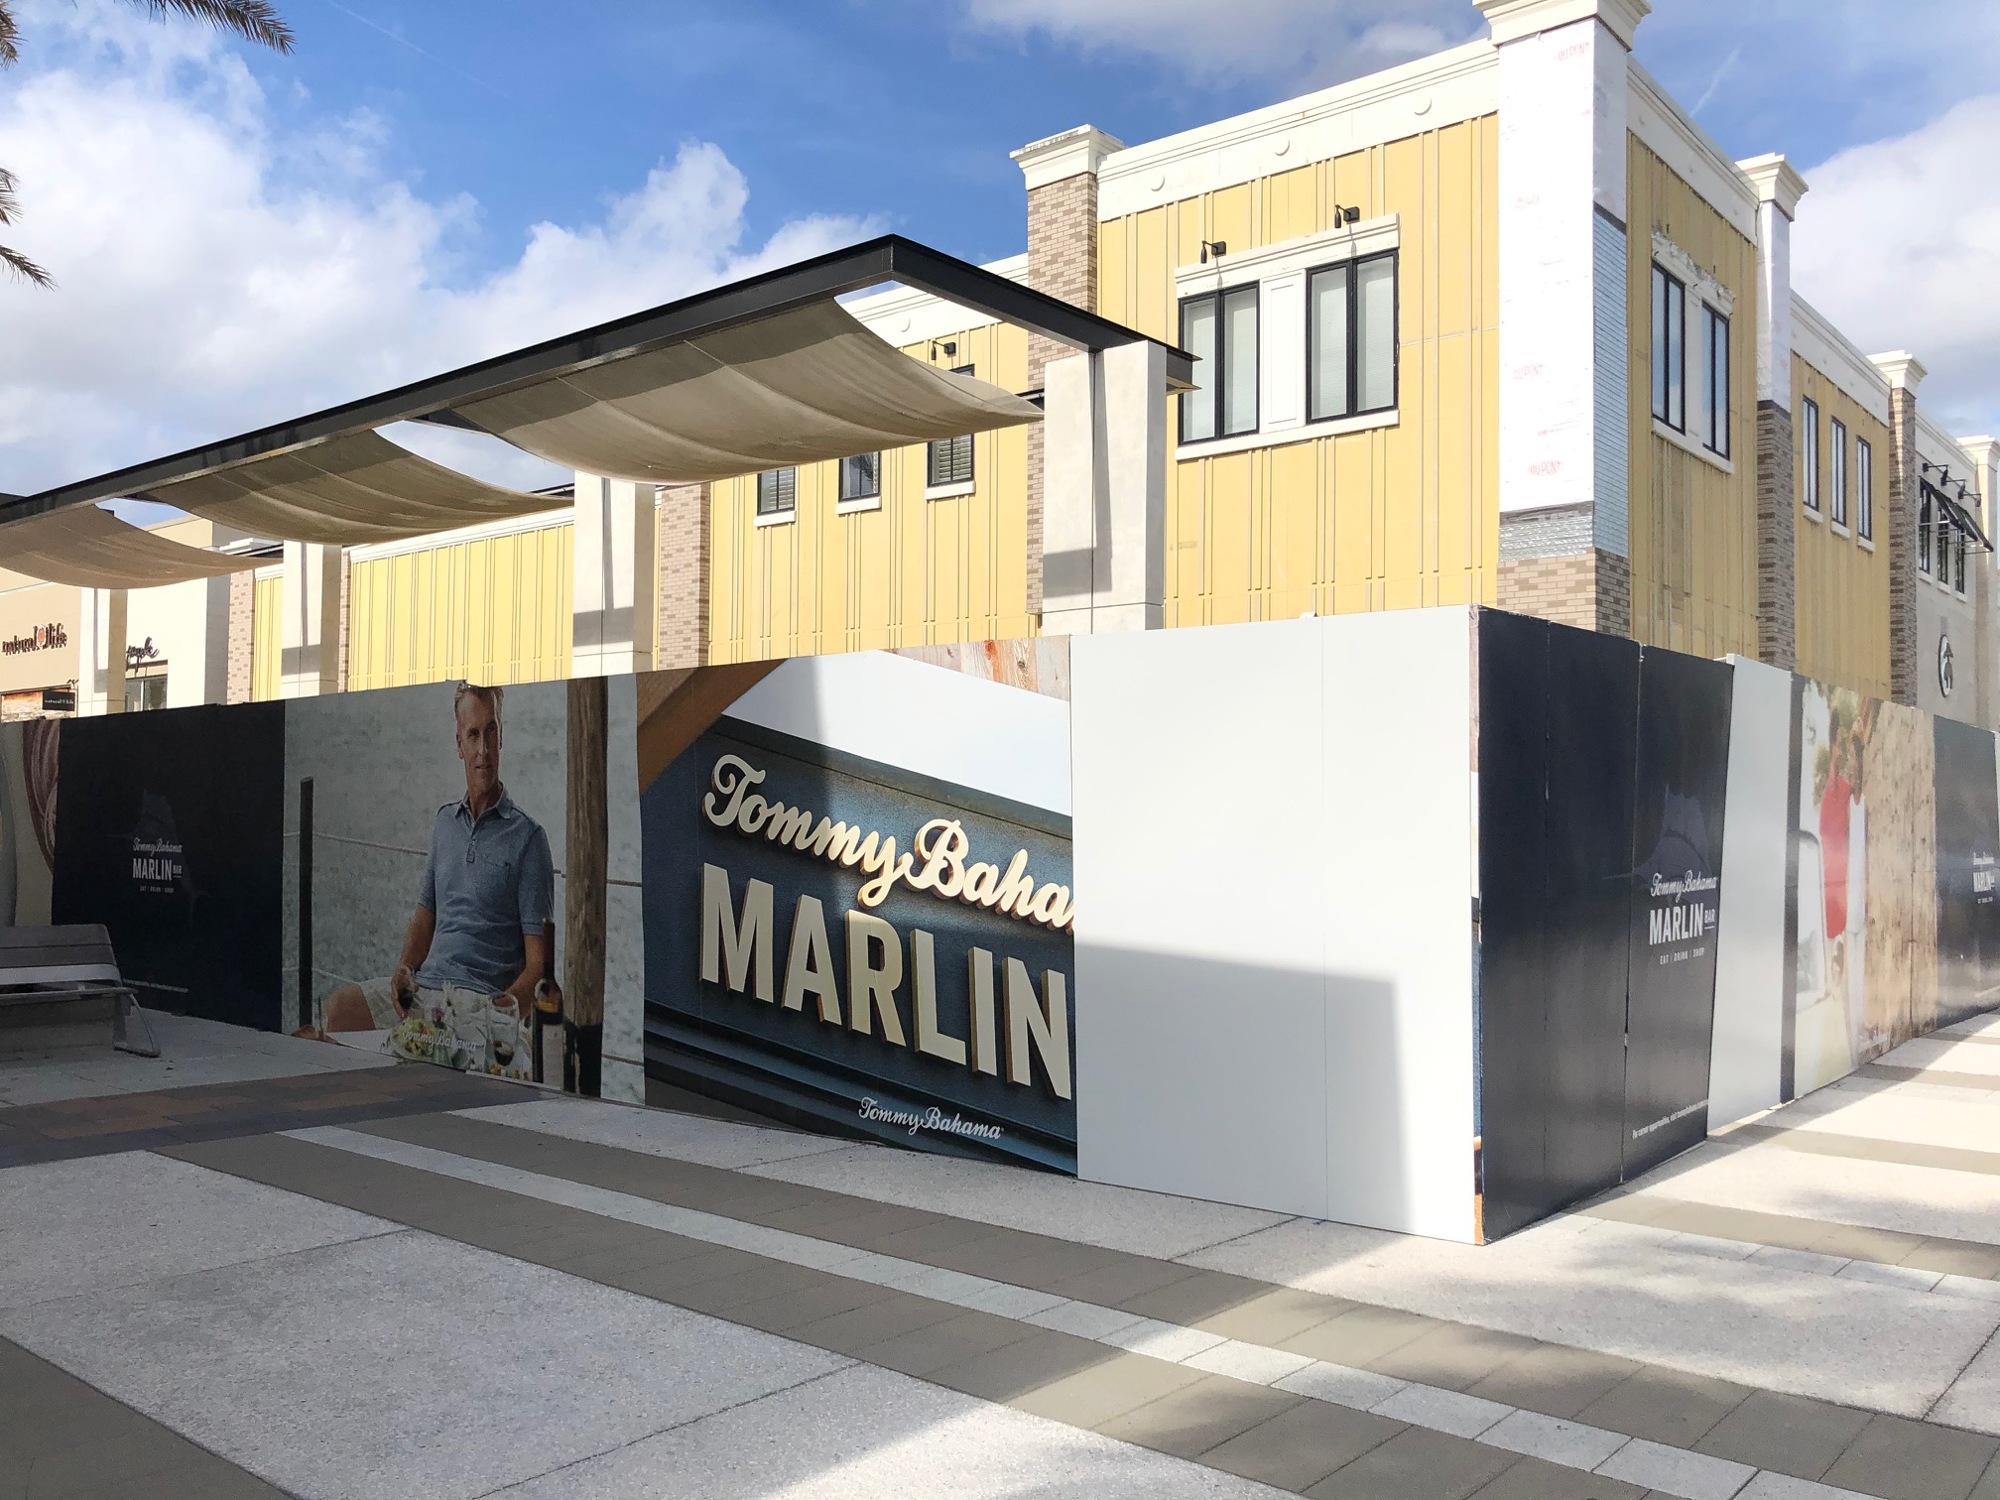 Tommy Bahama Marlin Bar is expected to open this spring at 4812 River City Drive, No. 137.